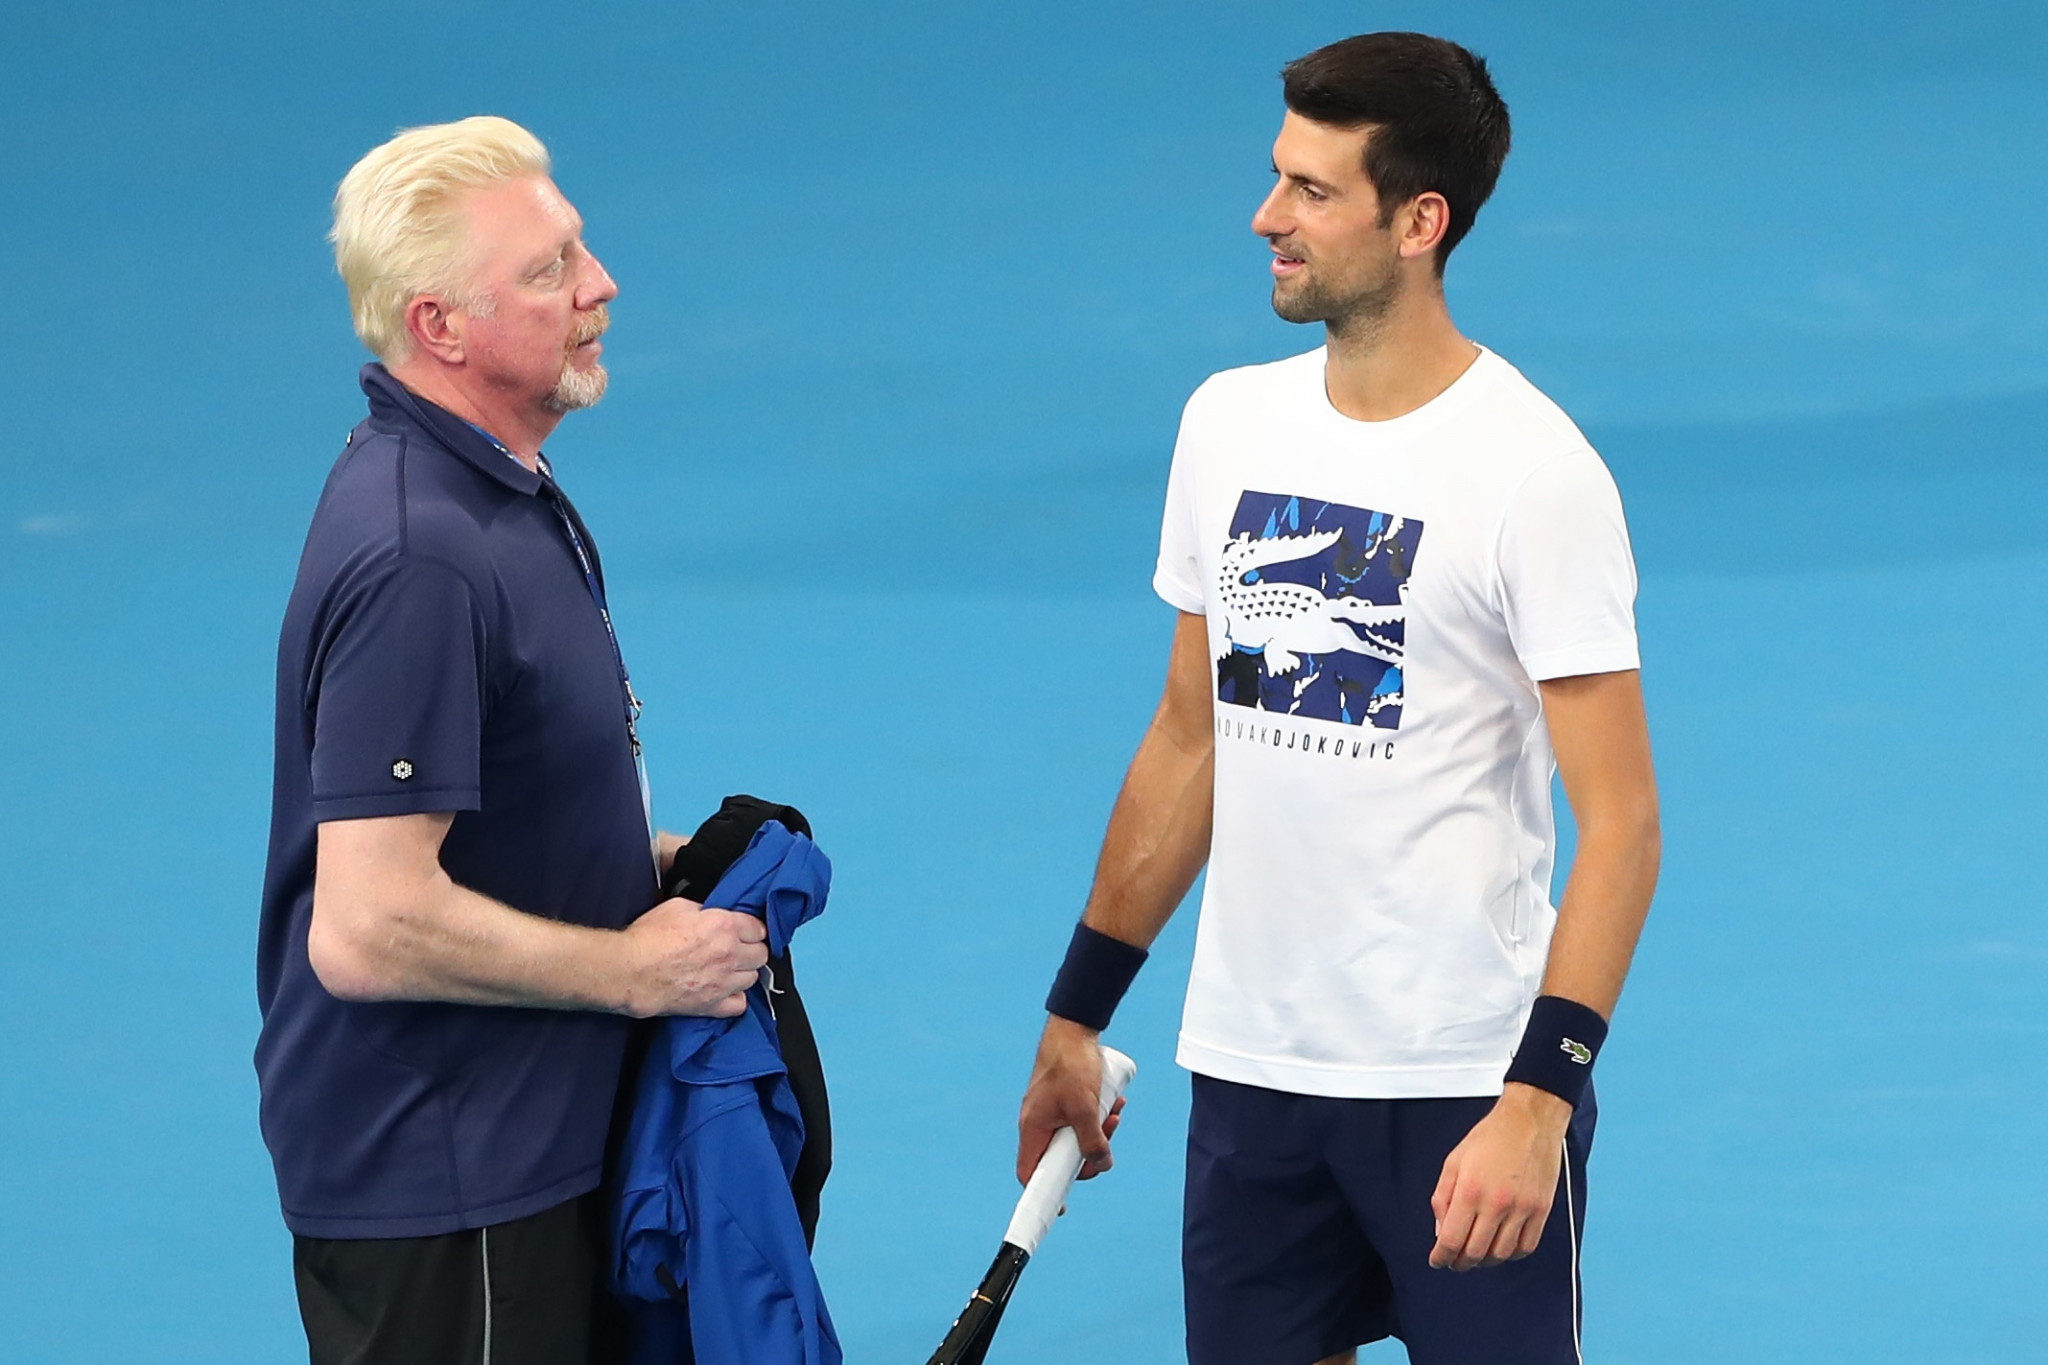 Boris Becker has previously coached men's singles world number one Novak Djokovic ©Getty Images